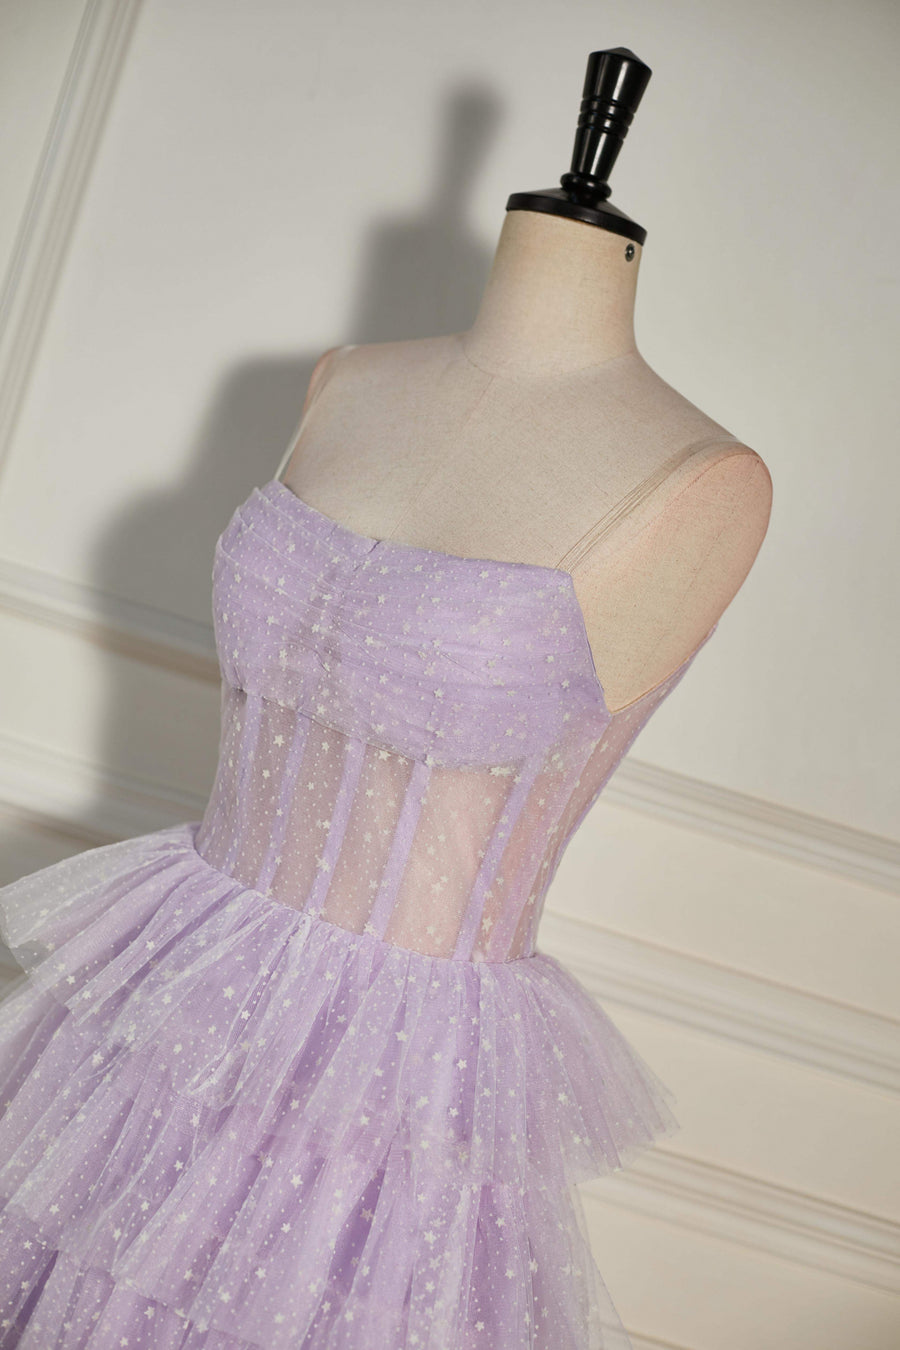 Lavender Strapless Dot Tulle Multi-Layers Homecoming Dress